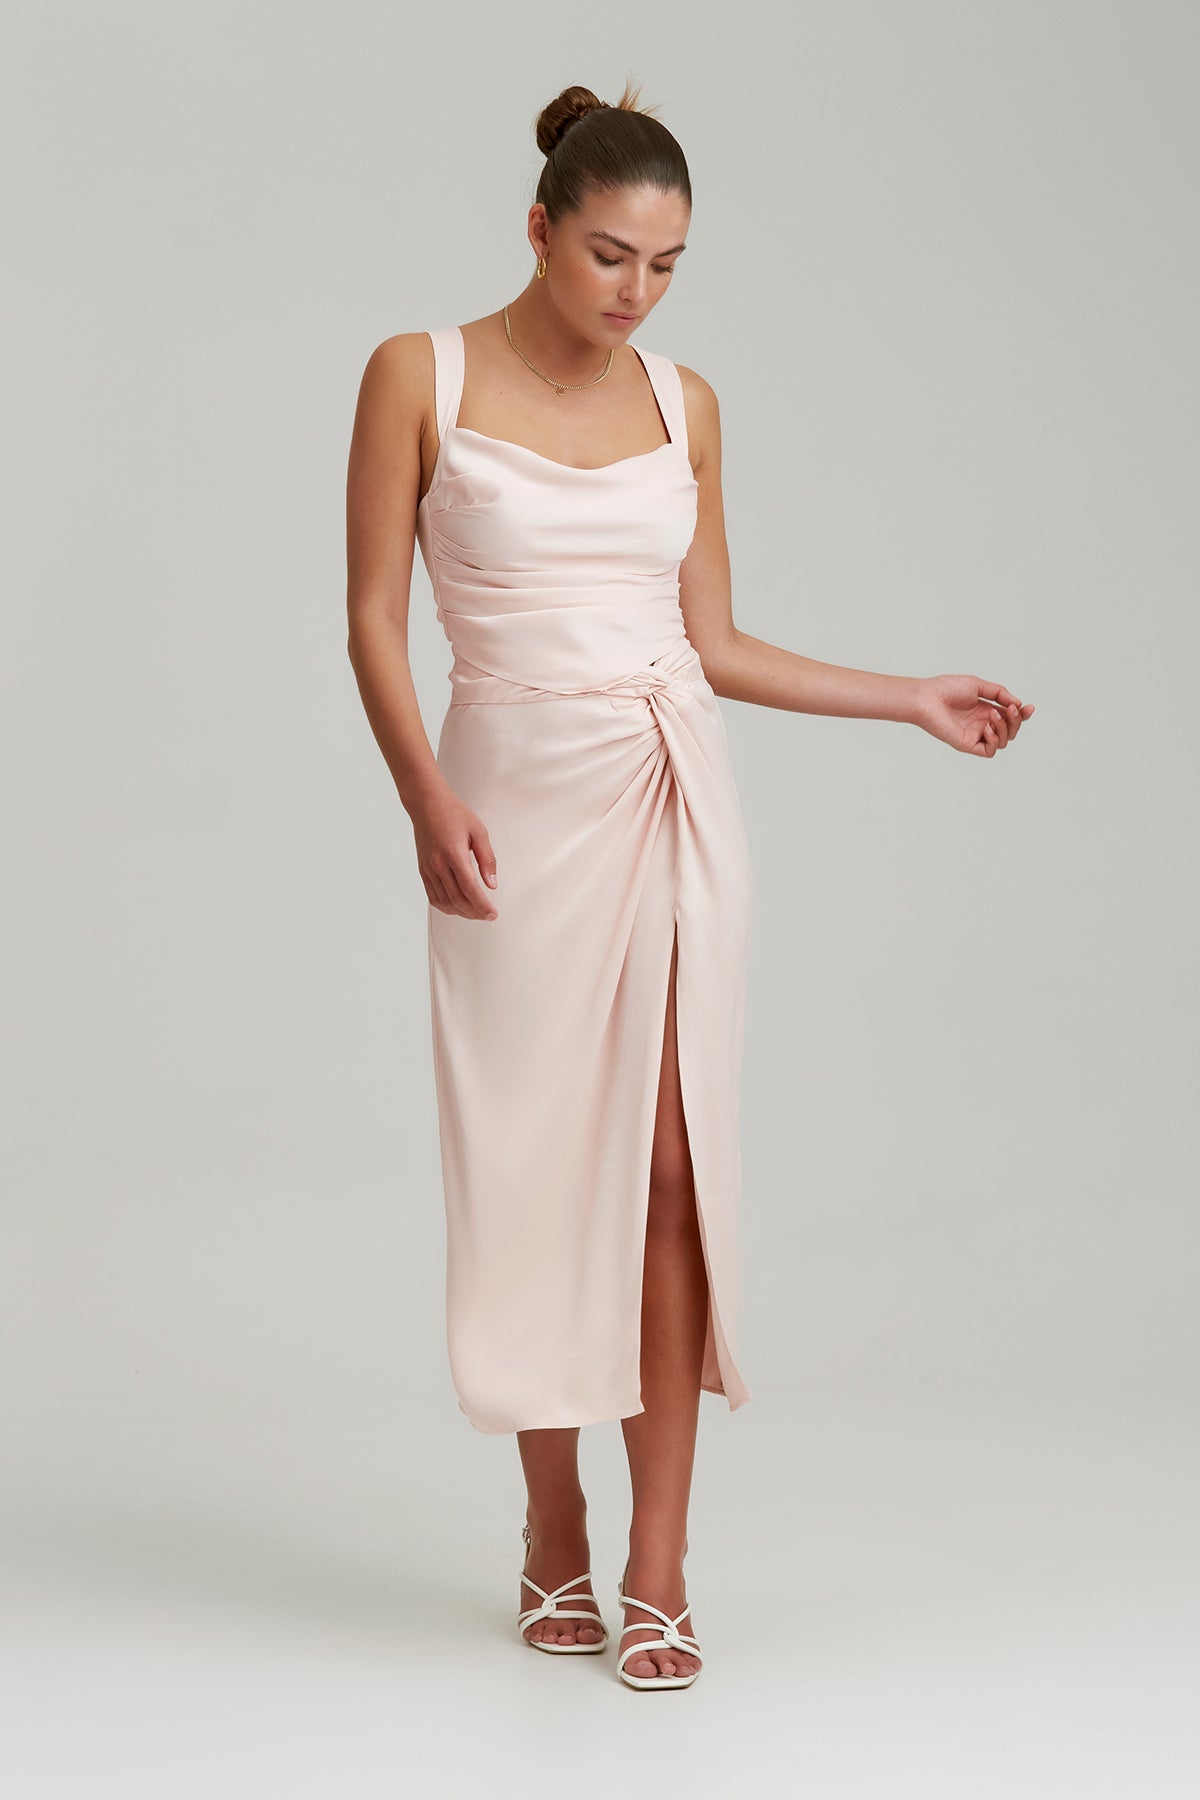 Finders - Lucia Skirt - Baby Pink